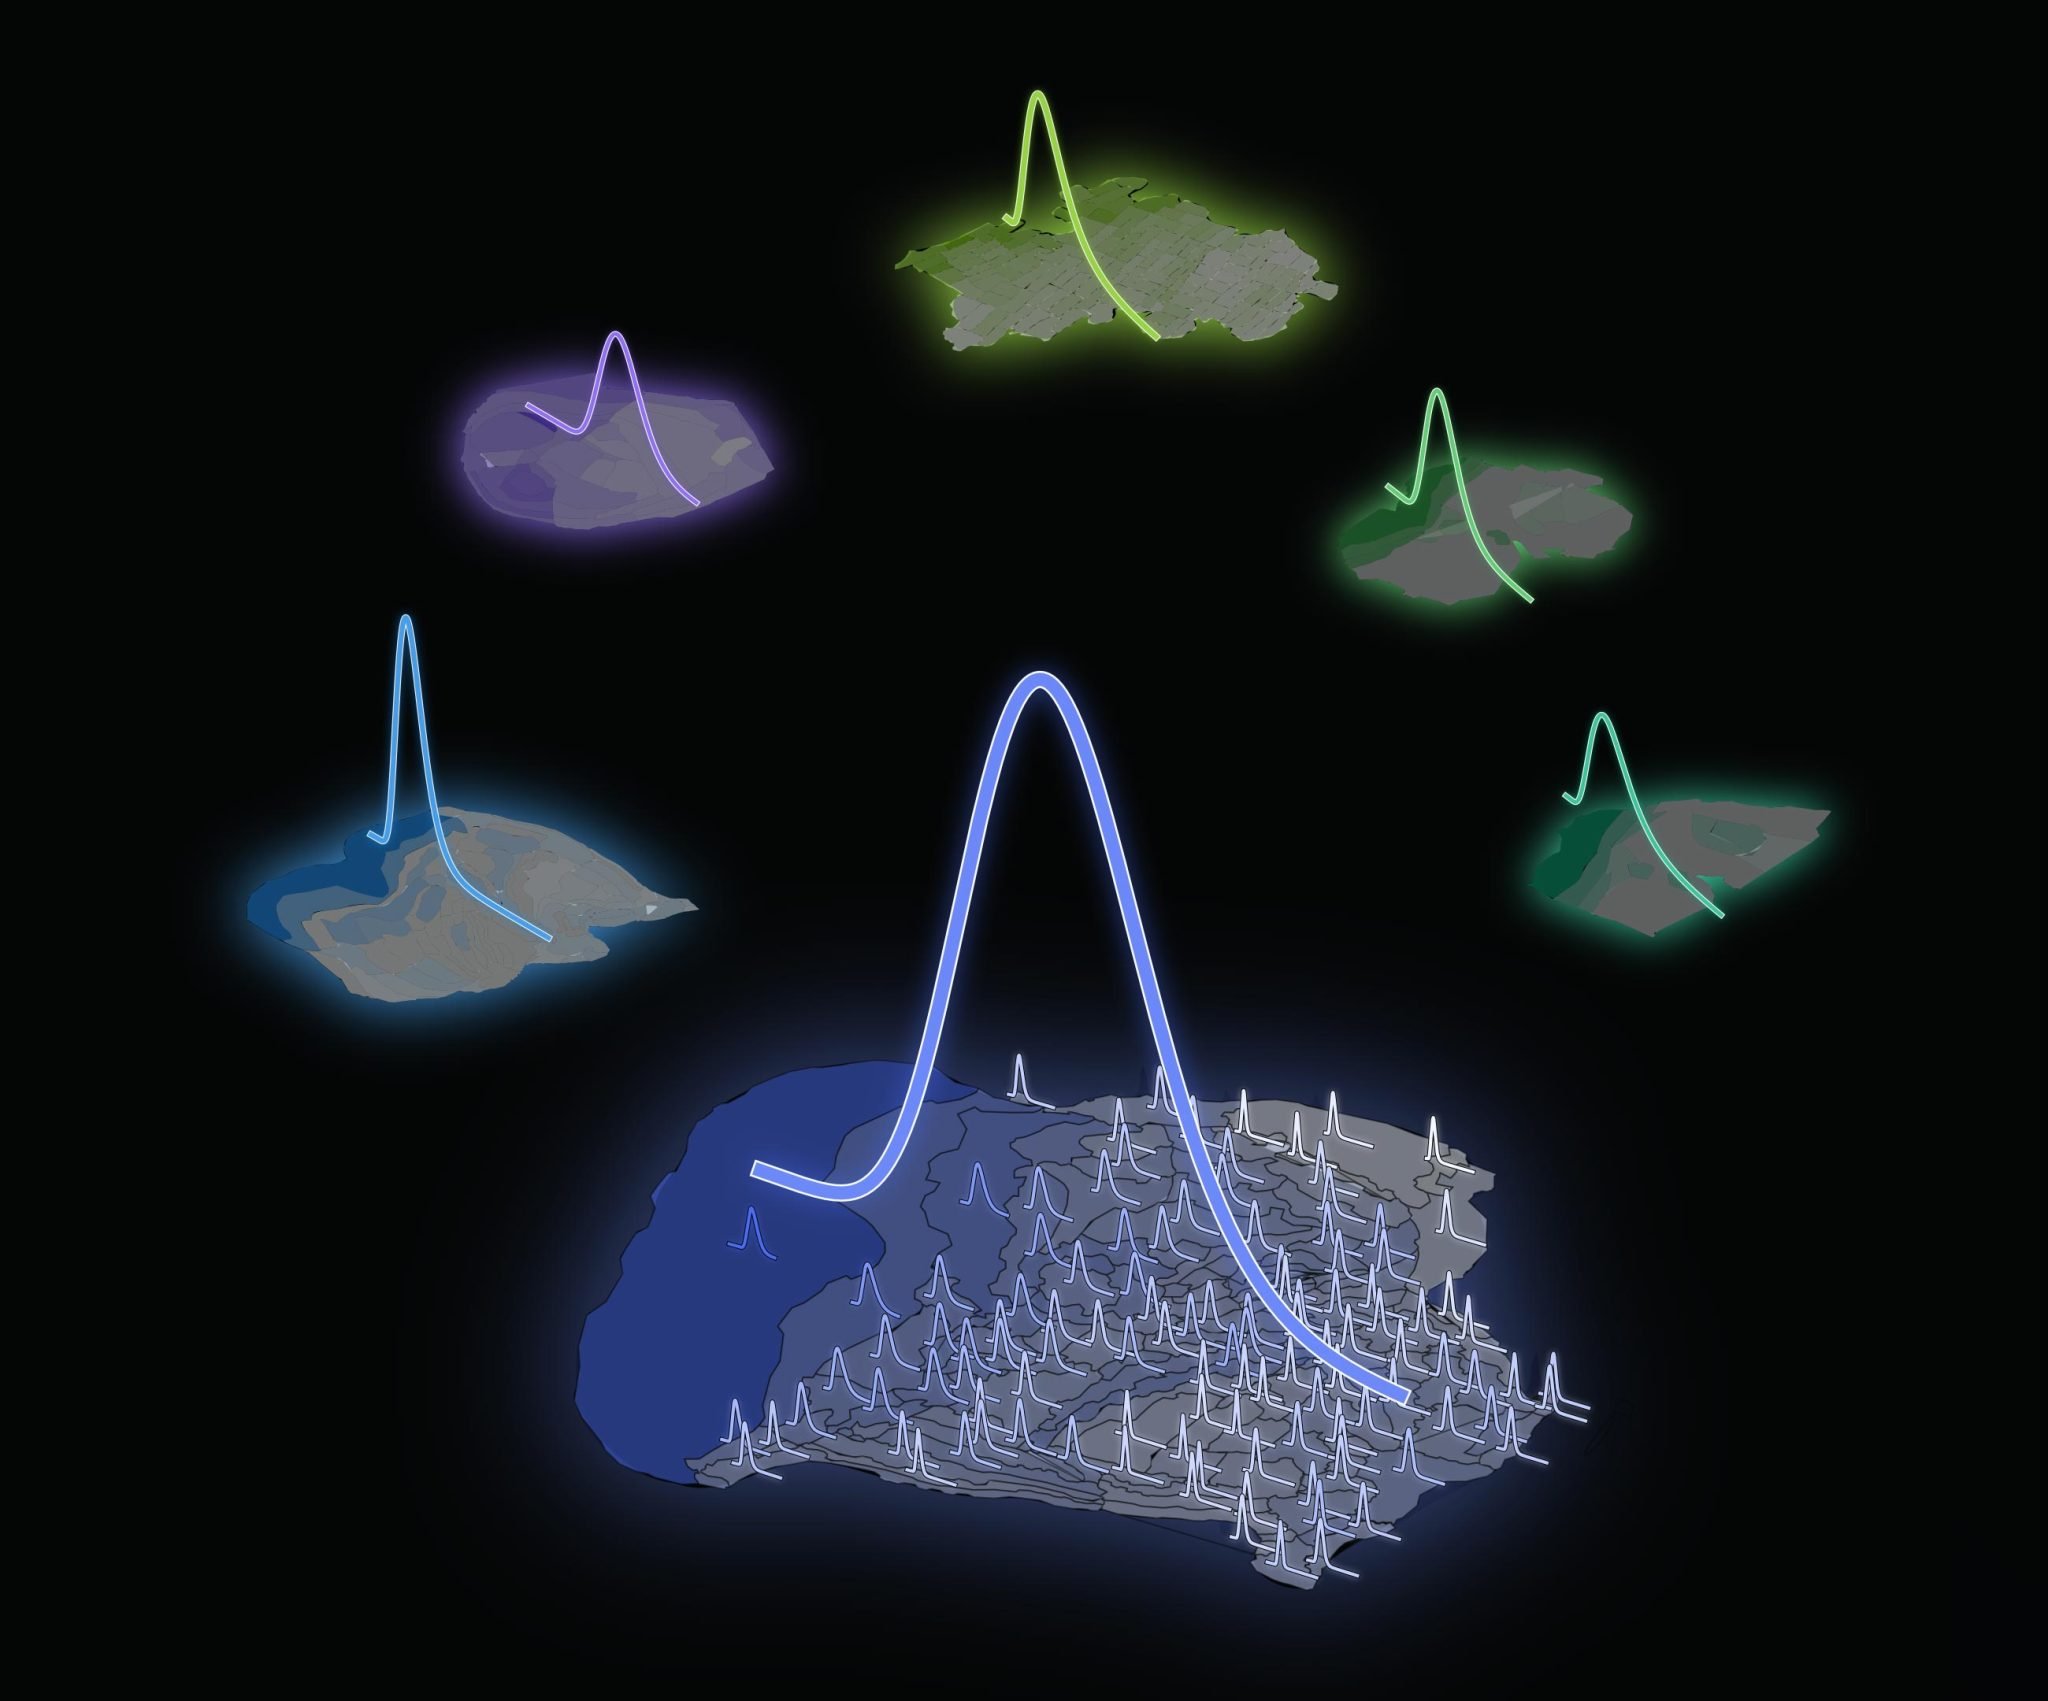 The mathematical rule behind the distribution of neurons